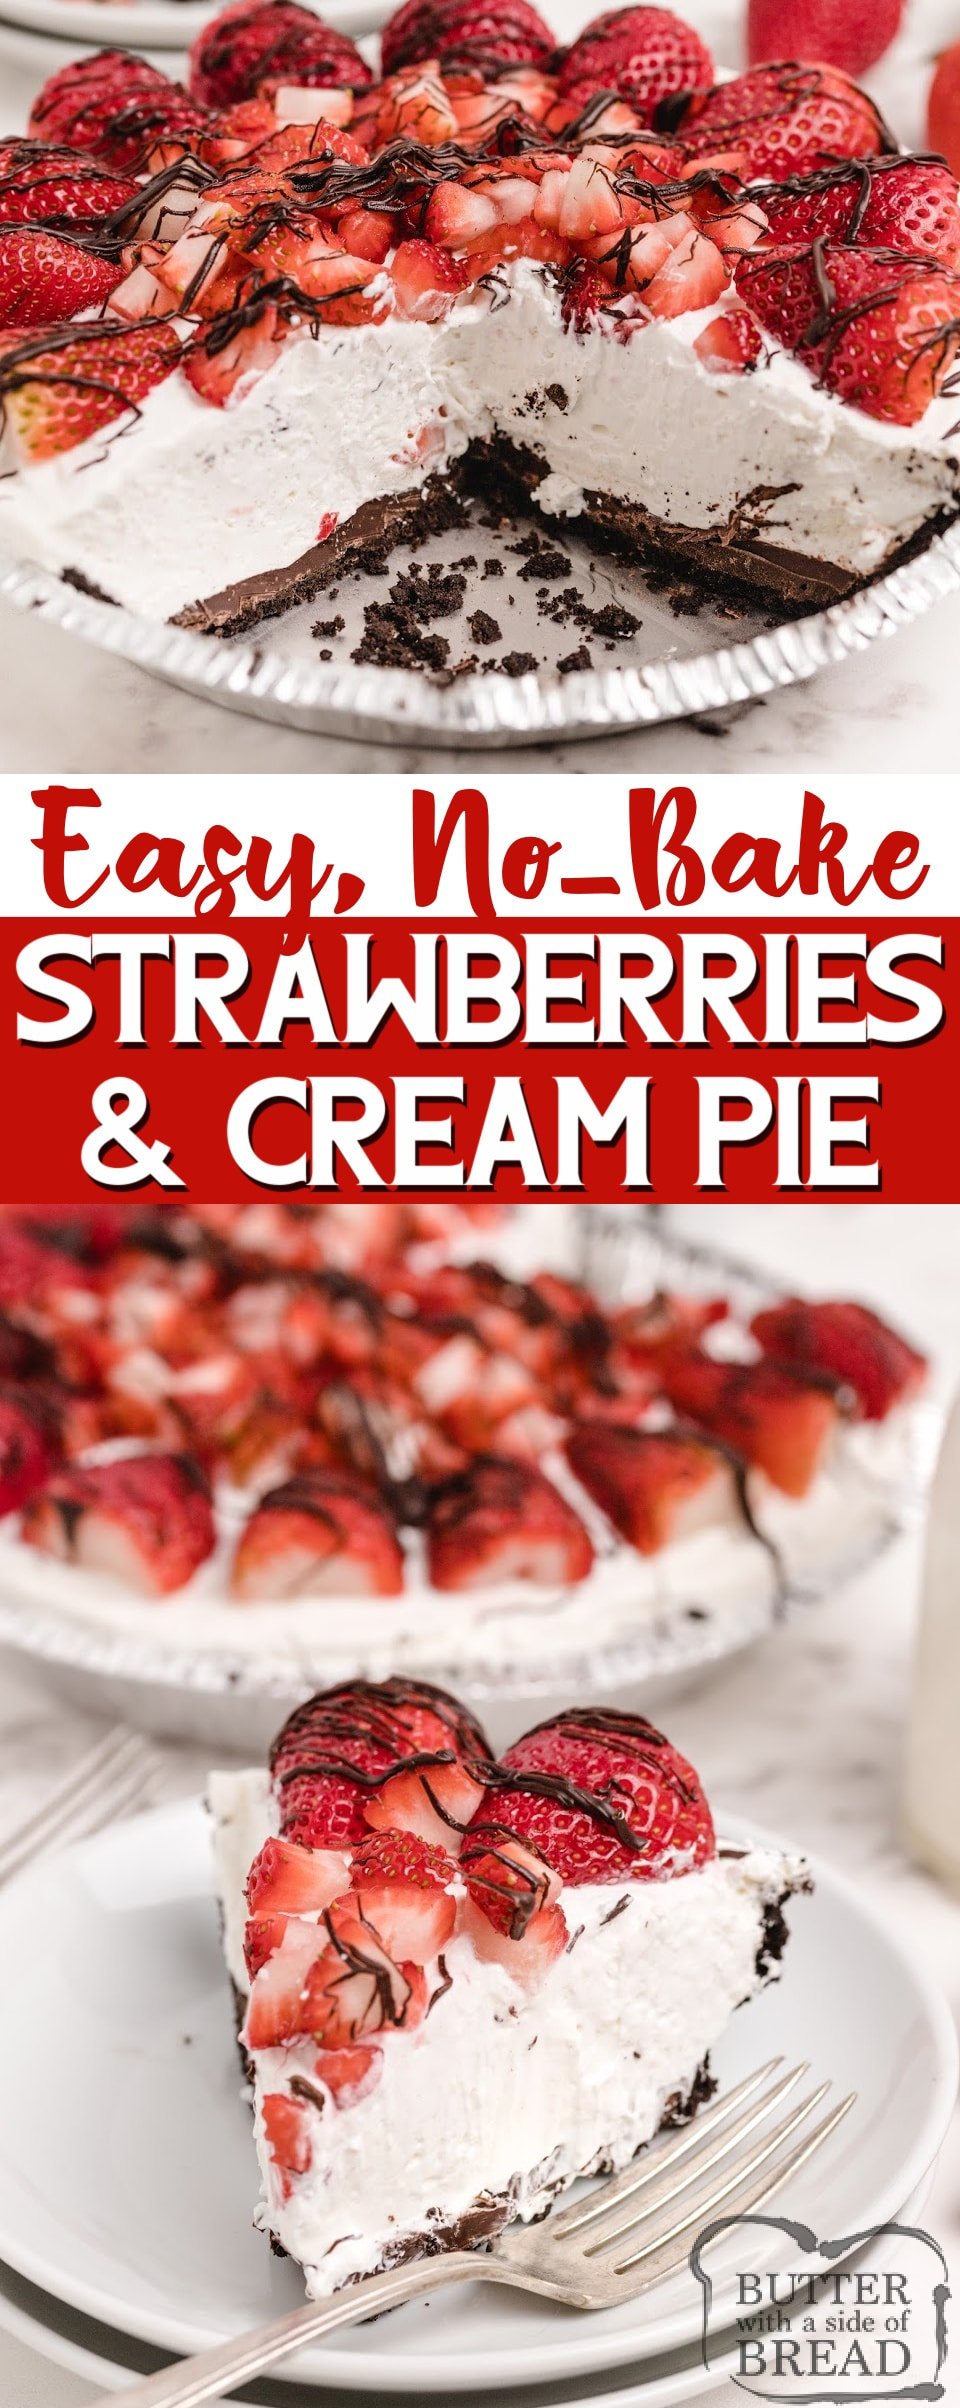 Strawberries and Cream Pie is a delicious no-bake pie recipe that is light and refreshing and so easy to make! Sweet cream cheese filling in an Oreo crust, topped with tons of fresh strawberries! 